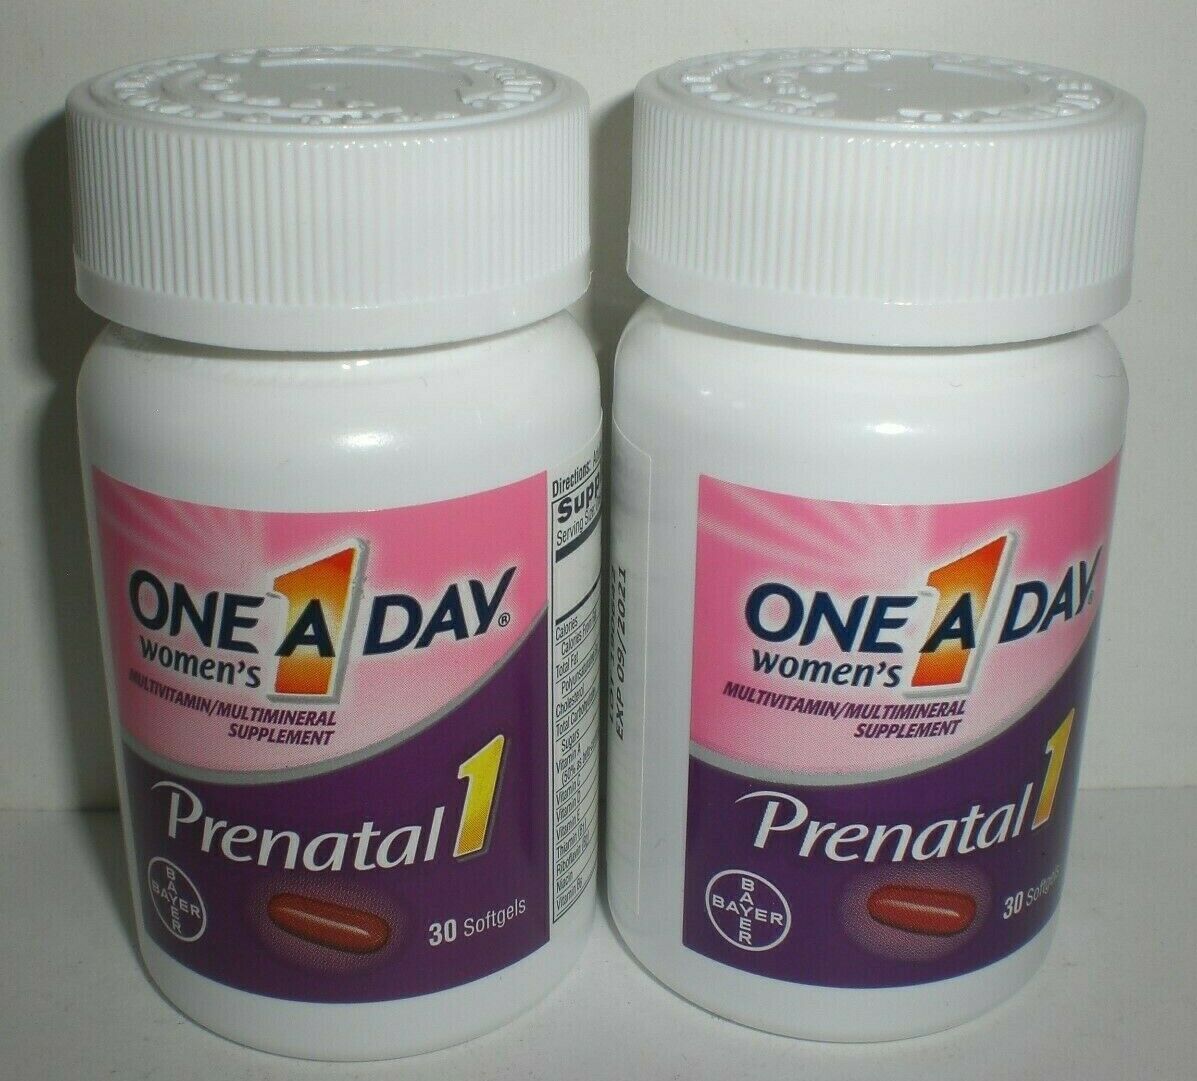 One A Day Women S Daily Prenatal 1 Multivitamin Supplement 60 Softgels Total Vitamins And Minerals